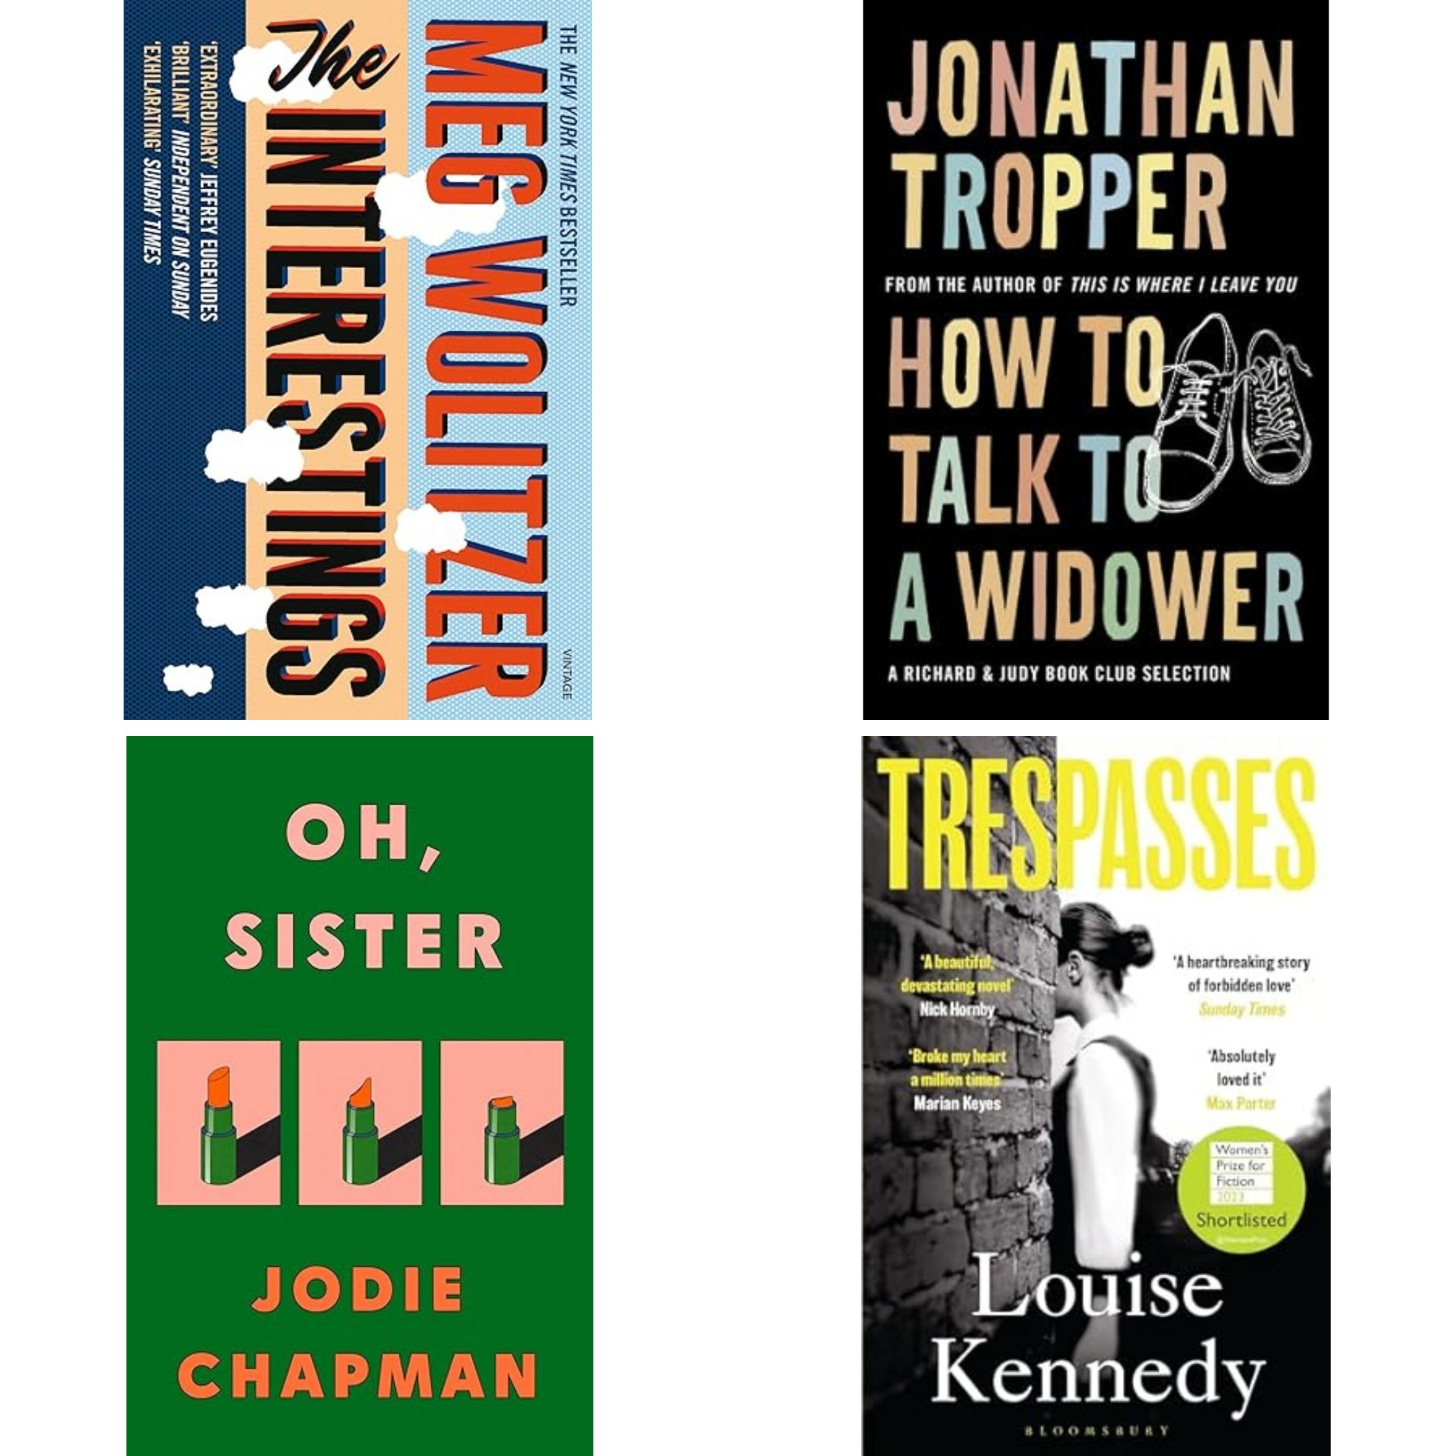 Image shows four book covers